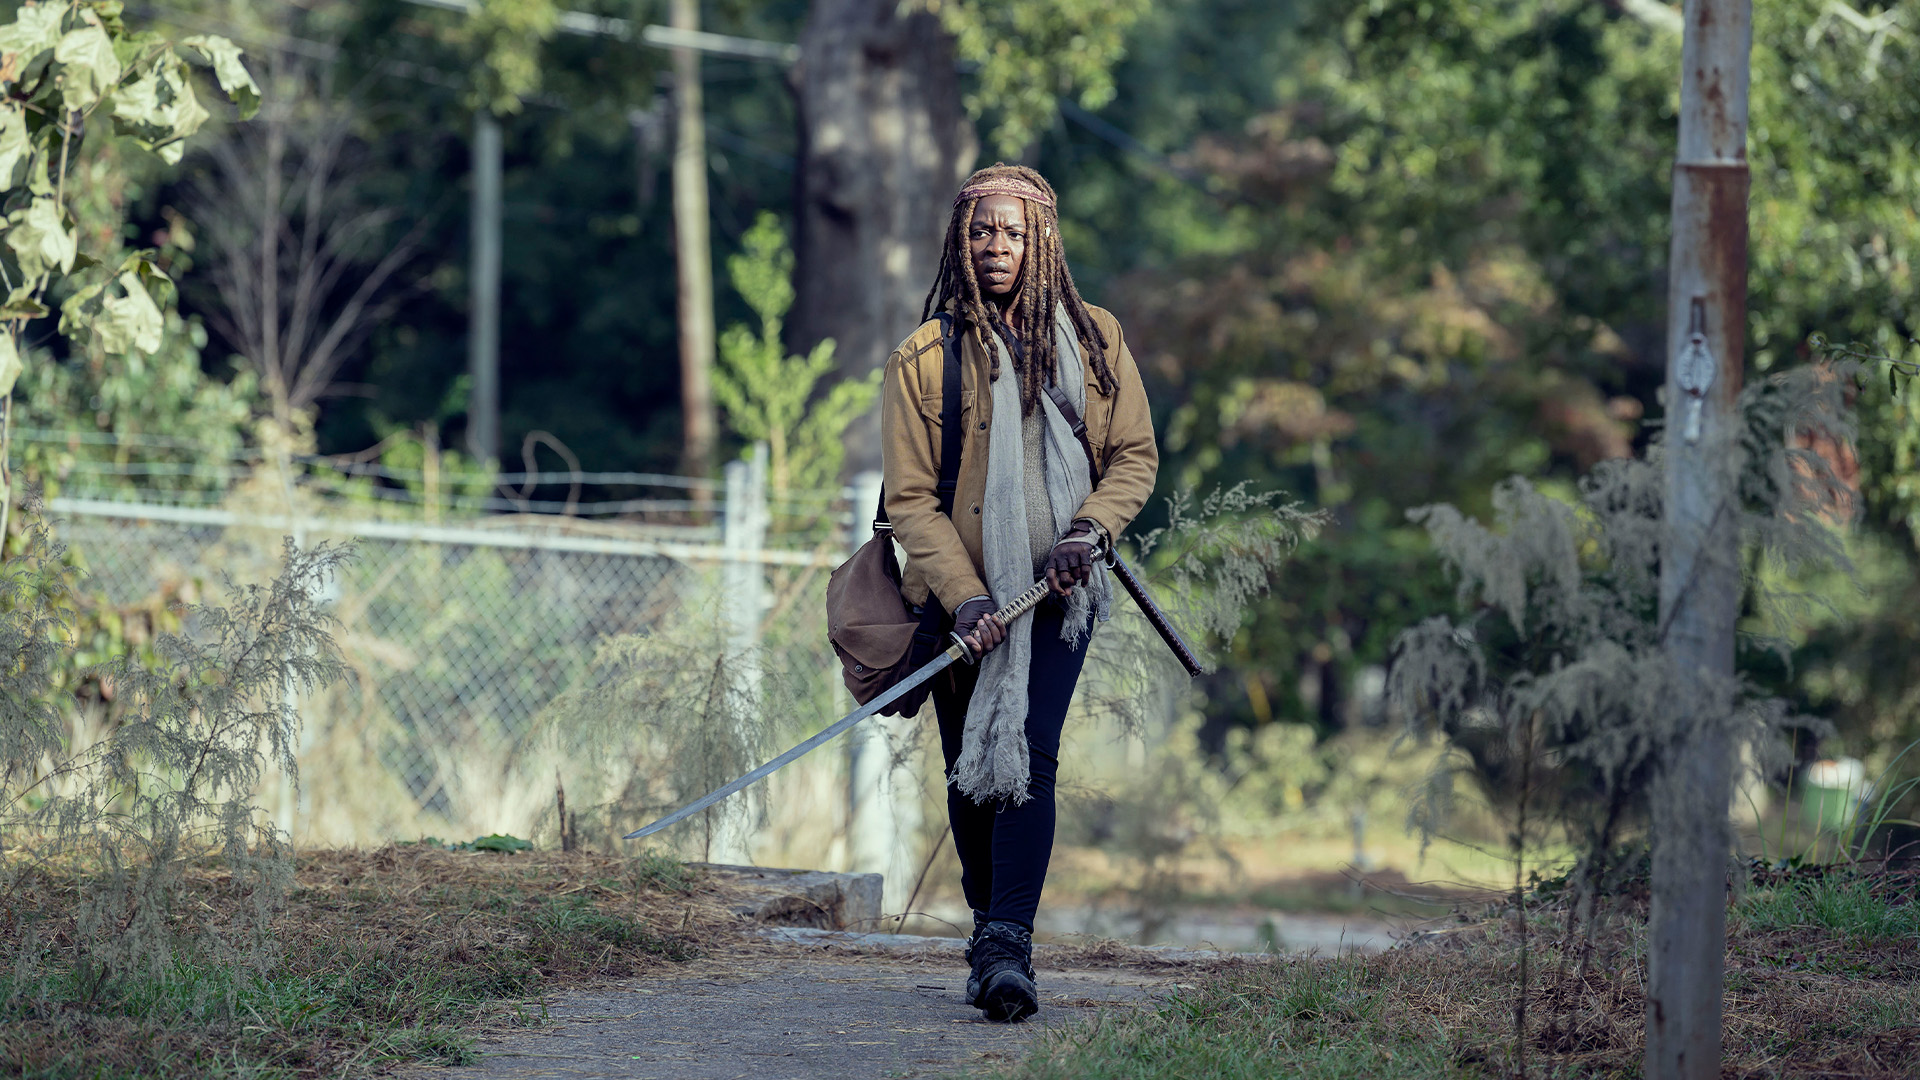 Scars: Best of Michonne Edition, Relive Michonne's best moments in this iconic episode from Season 9., Season 1066703, Episode 5